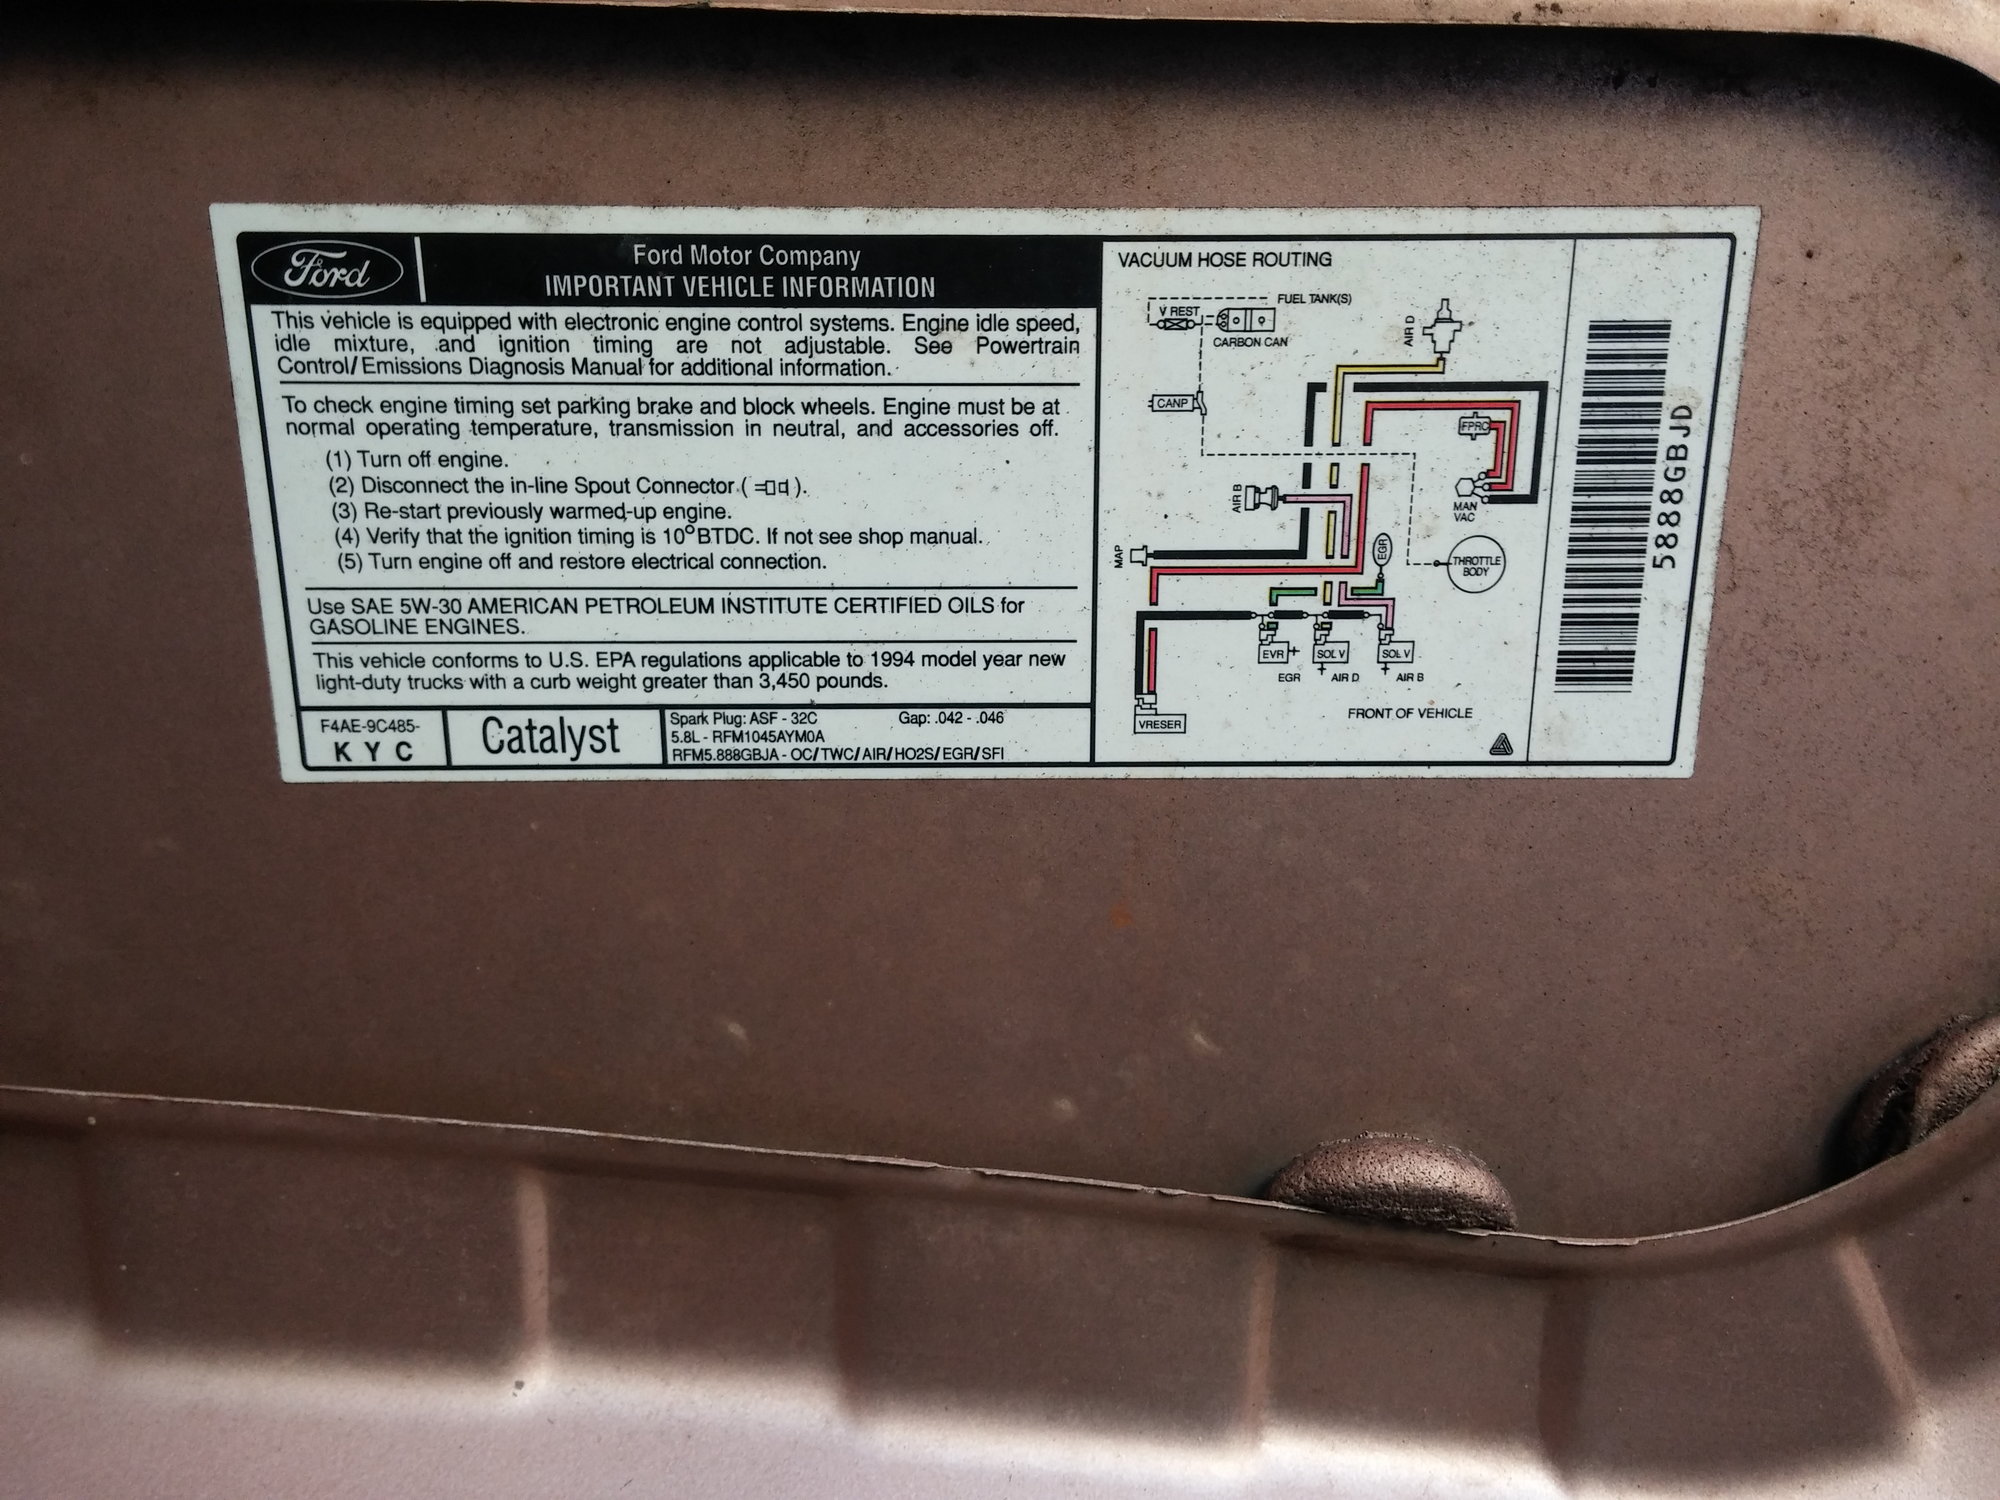 1989 F150 351W FI, need vacuum diagrams/pictures please - Ford Truck